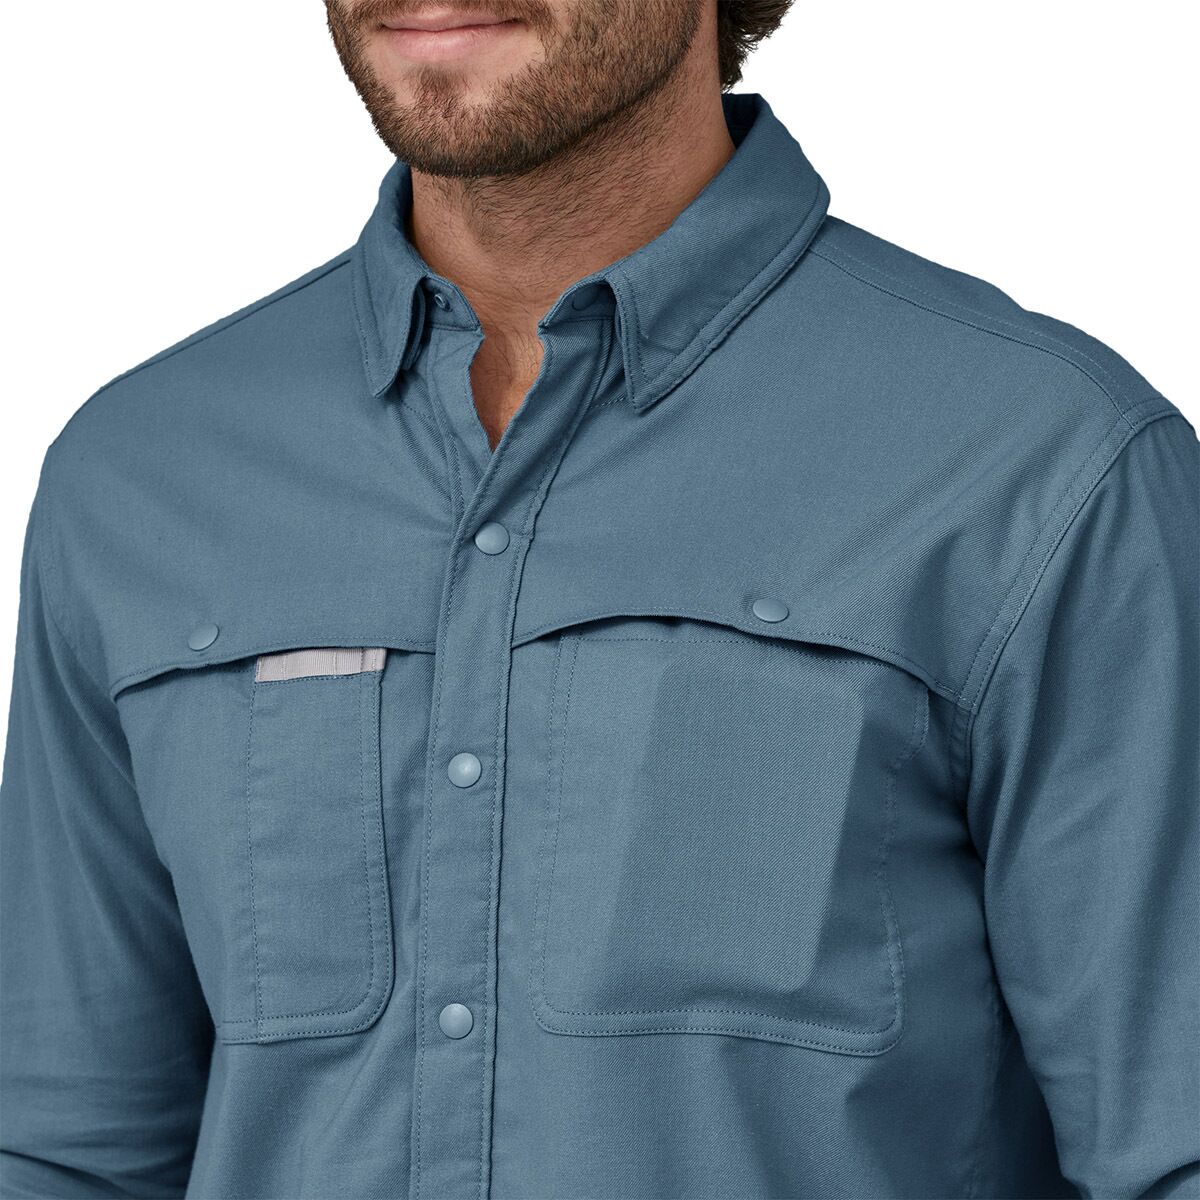 Patagonia Early Rise Stretch Long-Sleeve Shirt - Men's - Clothing